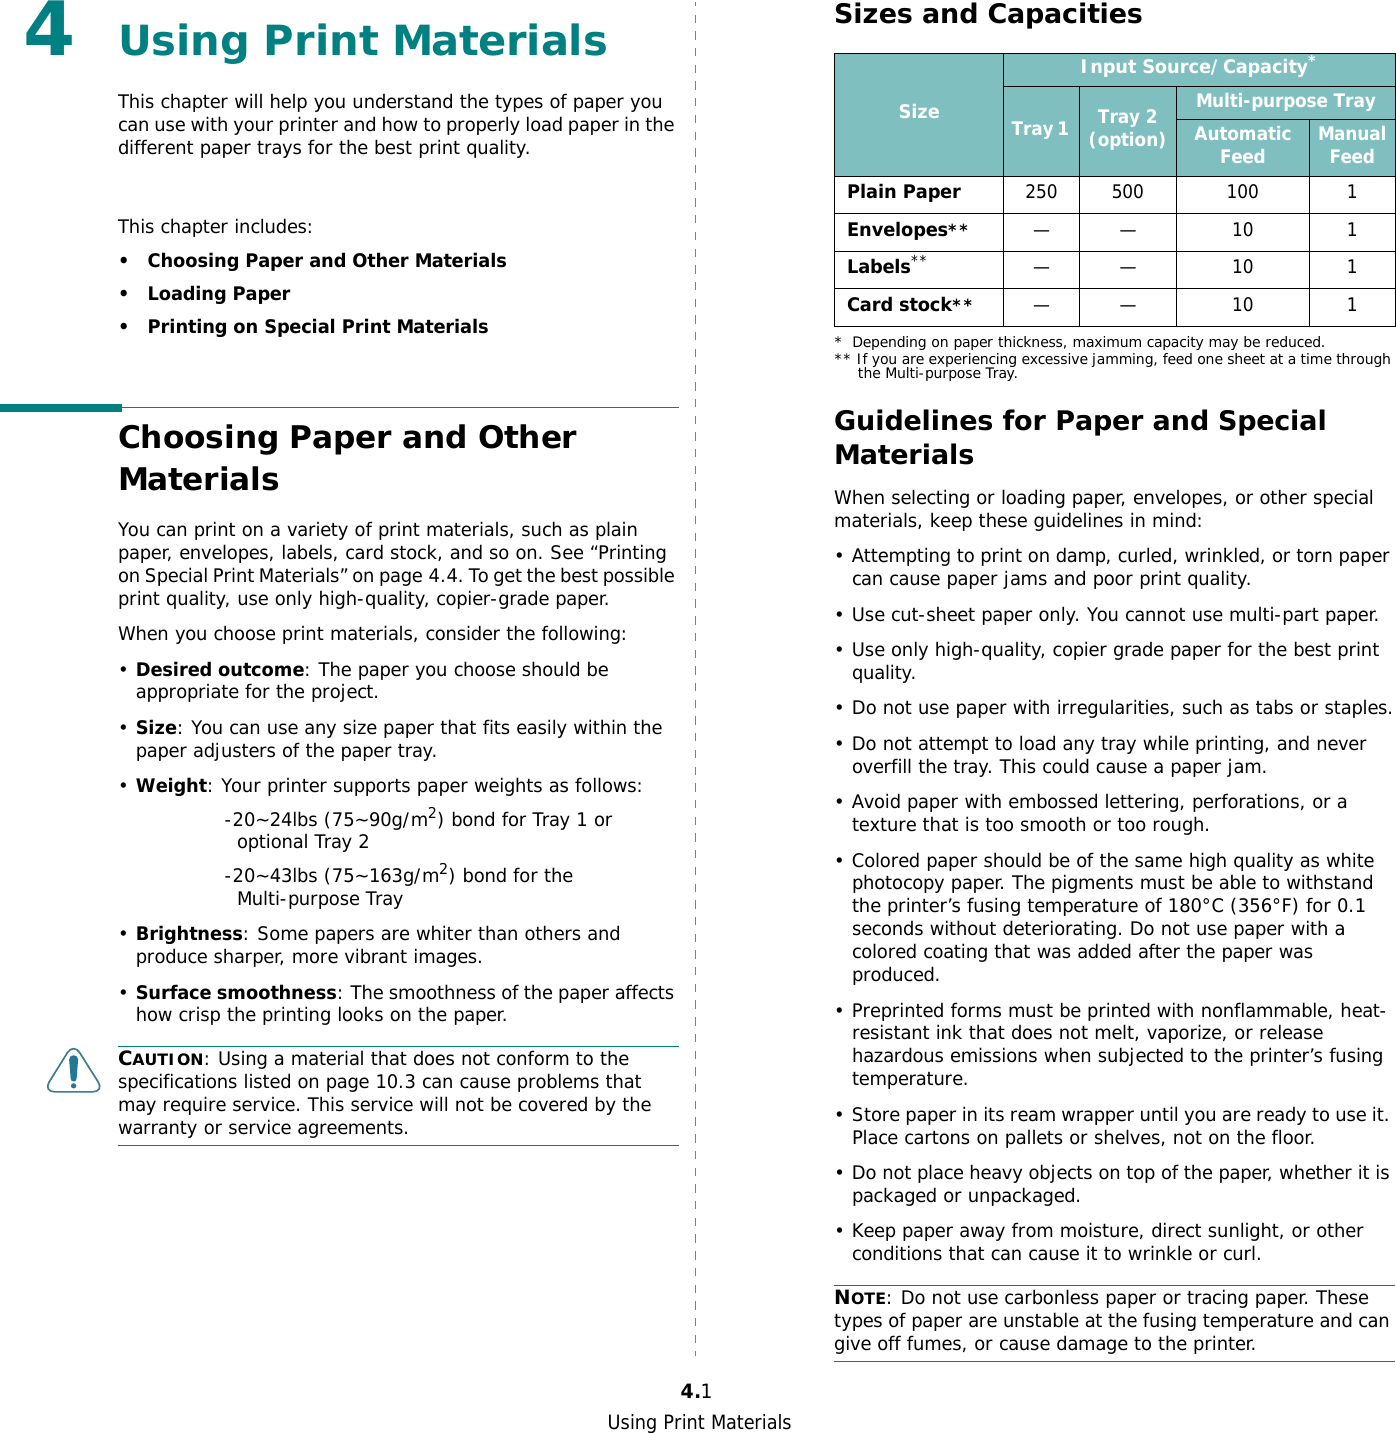 Using Print Materials4.14Using Print MaterialsThis chapter will help you understand the types of paper you can use with your printer and how to properly load paper in the different paper trays for the best print quality. This chapter includes:• Choosing Paper and Other Materials•Loading Paper• Printing on Special Print MaterialsChoosing Paper and Other MaterialsYou can print on a variety of print materials, such as plain paper, envelopes, labels, card stock, and so on. See “Printing on Special Print Materials” on page 4.4. To get the best possible print quality, use only high-quality, copier-grade paper.When you choose print materials, consider the following:•Desired outcome: The paper you choose should be appropriate for the project.•Size: You can use any size paper that fits easily within the paper adjusters of the paper tray.•Weight: Your printer supports paper weights as follows:                 -20~24lbs (75~90g/m2) bond for Tray 1 or            optional Tray 2                 -20~43lbs (75~163g/m2) bond for the            Multi-purpose Tray•Brightness: Some papers are whiter than others and produce sharper, more vibrant images. •Surface smoothness: The smoothness of the paper affects how crisp the printing looks on the paper.CAUTION: Using a material that does not conform to the specifications listed on page 10.3 can cause problems that may require service. This service will not be covered by the warranty or service agreements.Sizes and CapacitiesGuidelines for Paper and Special MaterialsWhen selecting or loading paper, envelopes, or other special materials, keep these guidelines in mind:• Attempting to print on damp, curled, wrinkled, or torn paper can cause paper jams and poor print quality.• Use cut-sheet paper only. You cannot use multi-part paper.• Use only high-quality, copier grade paper for the best print quality. • Do not use paper with irregularities, such as tabs or staples.• Do not attempt to load any tray while printing, and never overfill the tray. This could cause a paper jam.• Avoid paper with embossed lettering, perforations, or a texture that is too smooth or too rough.• Colored paper should be of the same high quality as white photocopy paper. The pigments must be able to withstand the printer’s fusing temperature of 180°C (356°F) for 0.1 seconds without deteriorating. Do not use paper with a colored coating that was added after the paper was produced.• Preprinted forms must be printed with nonflammable, heat-resistant ink that does not melt, vaporize, or release hazardous emissions when subjected to the printer’s fusing temperature.• Store paper in its ream wrapper until you are ready to use it. Place cartons on pallets or shelves, not on the floor. • Do not place heavy objects on top of the paper, whether it is packaged or unpackaged. • Keep paper away from moisture, direct sunlight, or other conditions that can cause it to wrinkle or curl.NOTE: Do not use carbonless paper or tracing paper. These types of paper are unstable at the fusing temperature and can give off fumes, or cause damage to the printer.SizeInput Source/Capacity** Depending on paper thickness, maximum capacity may be reduced.Tray 1  Tray 2(option)Multi-purpose TrayAutomatic Feed Manual FeedPlain Paper 250 500 100 1Envelopes**—— 10 1Labels**** If you are experiencing excessive jamming, feed one sheet at a time through the Multi-purpose Tray.—— 10 1Card stock**—— 10 1